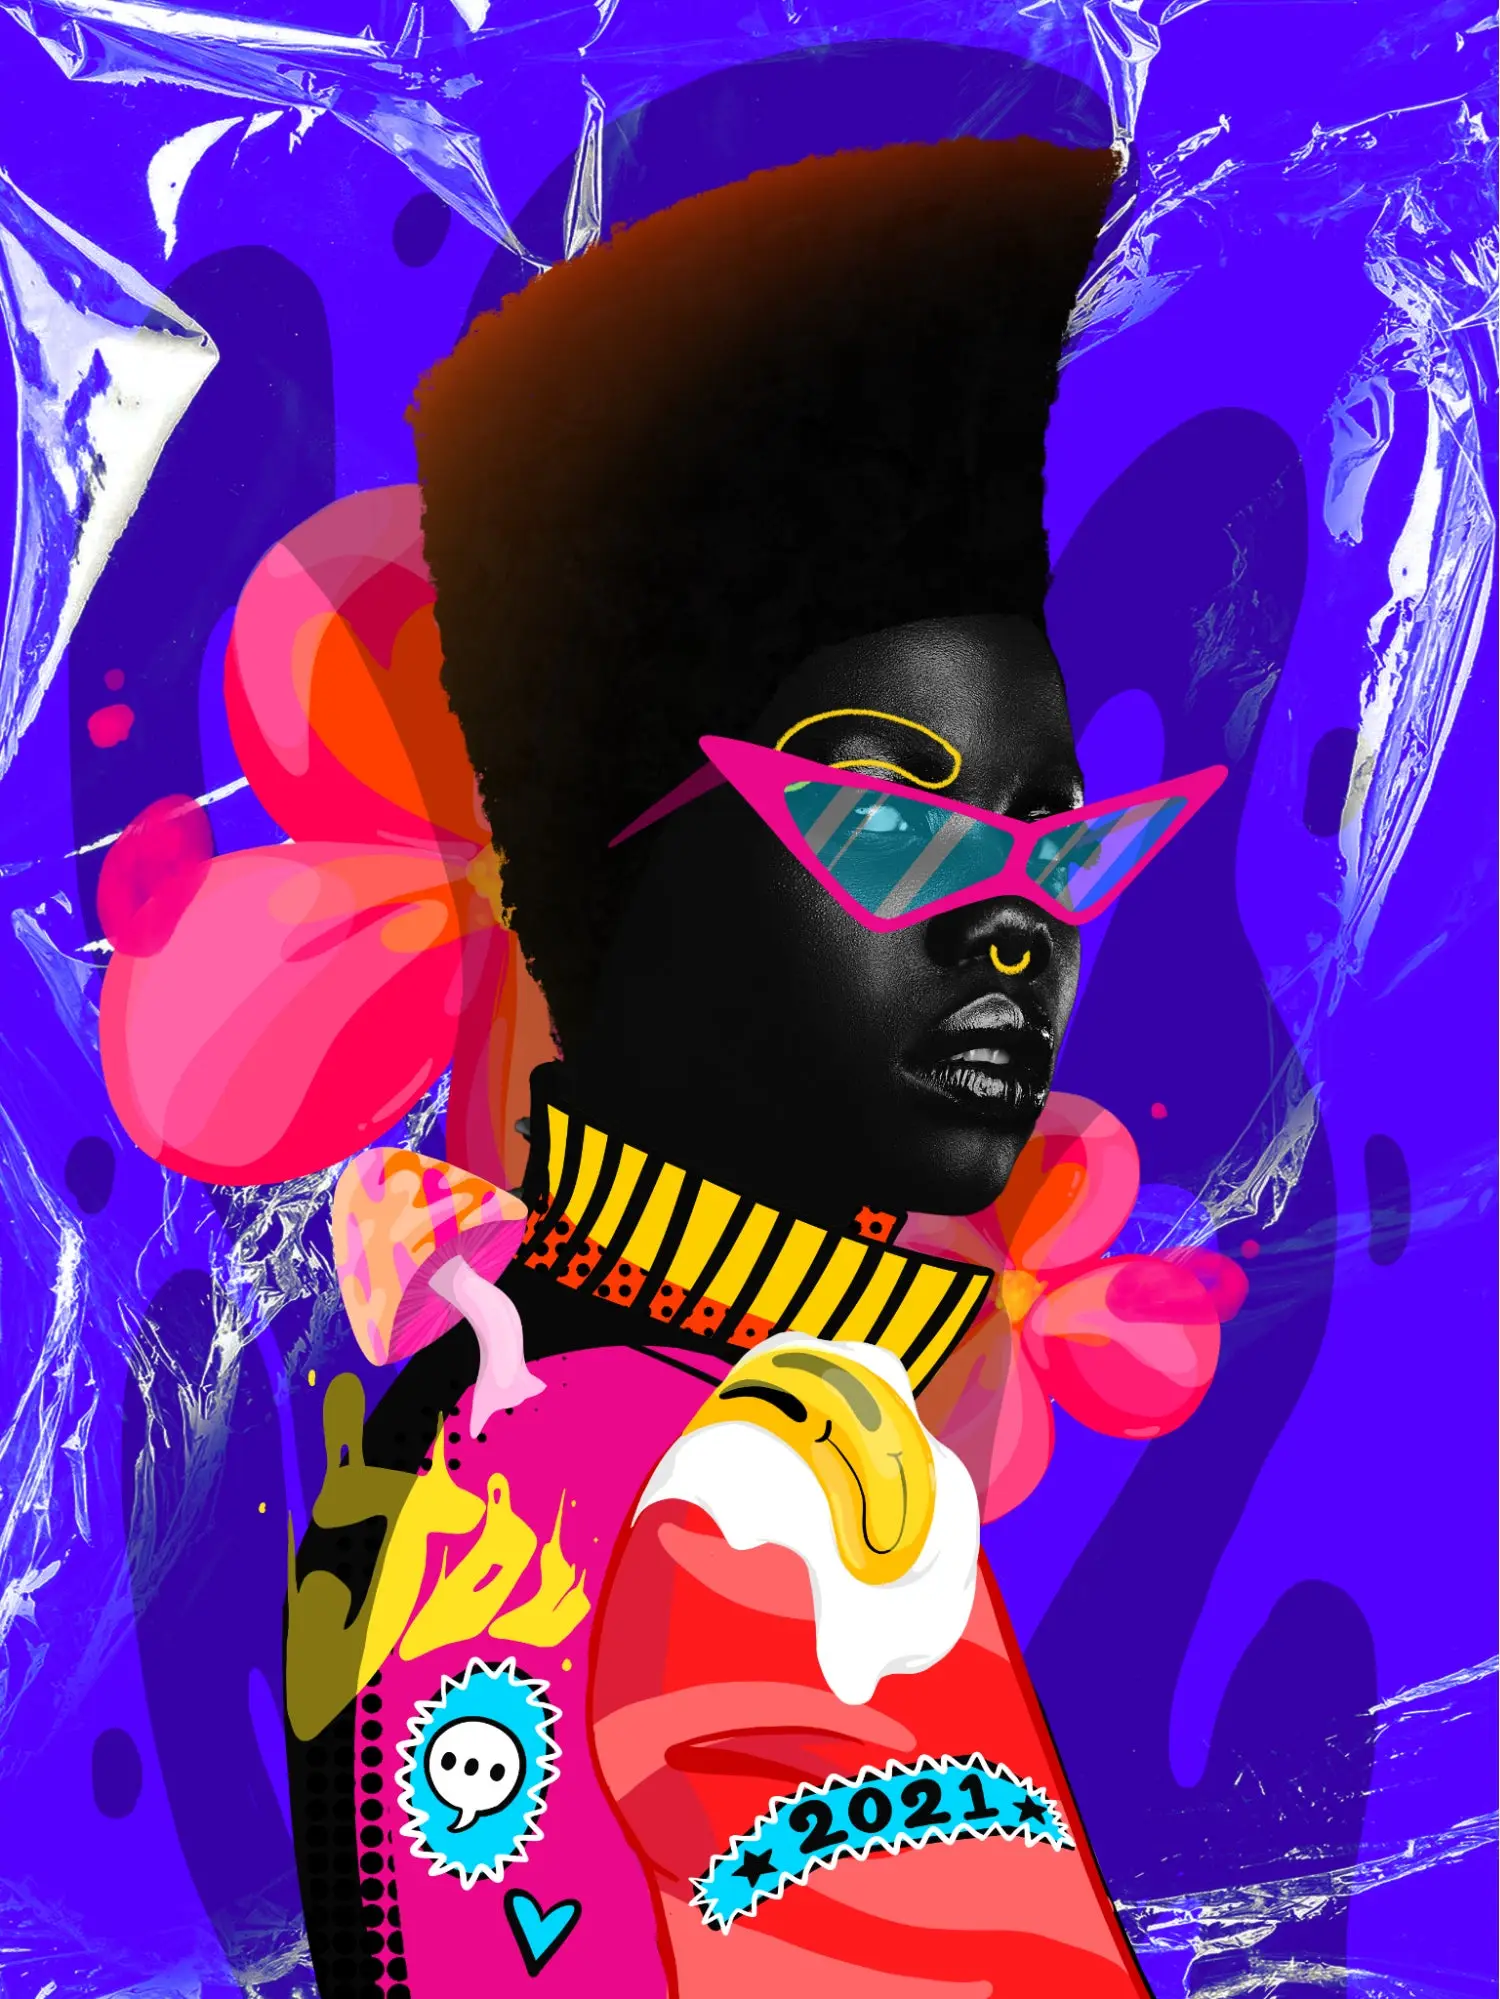 oyful poster artwork designed for the Adobe Make It Together series by D'ana Nunez, Kayla Coombs, Temi Coker, and Shaylin Wallace.